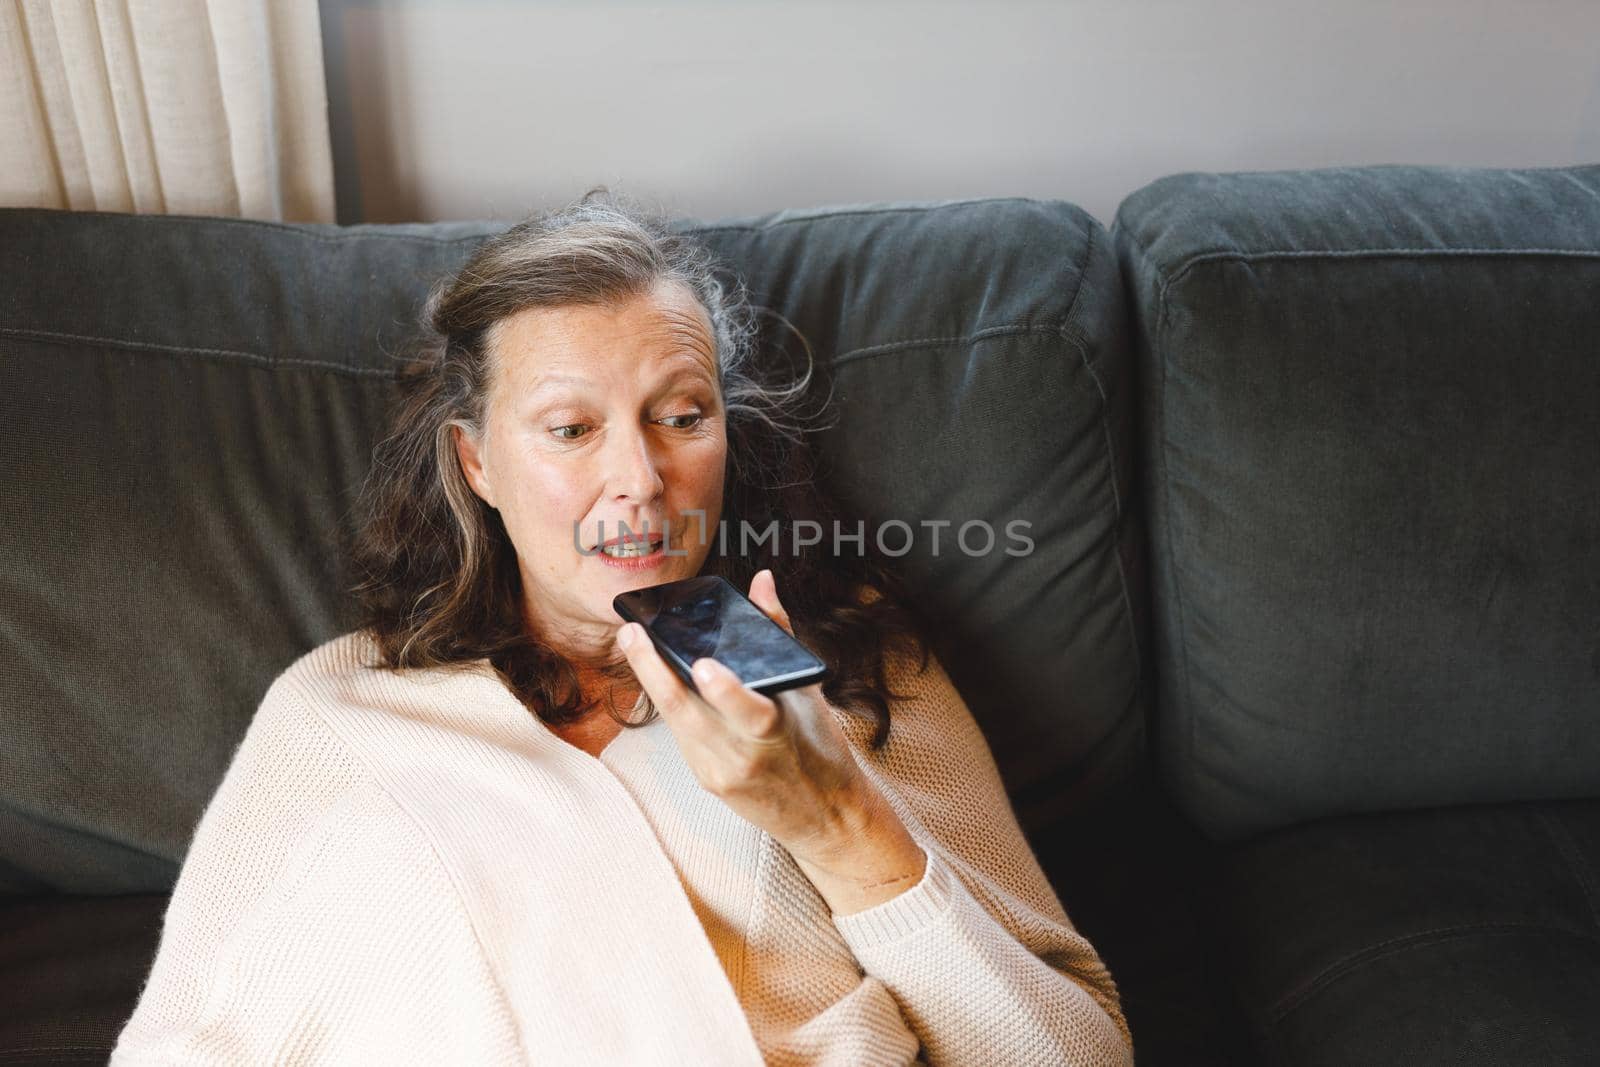 Happy senior caucasian woman in living room sitting on sofa, talking on smartphone. retirement lifestyle, spending time alone at home with technology.